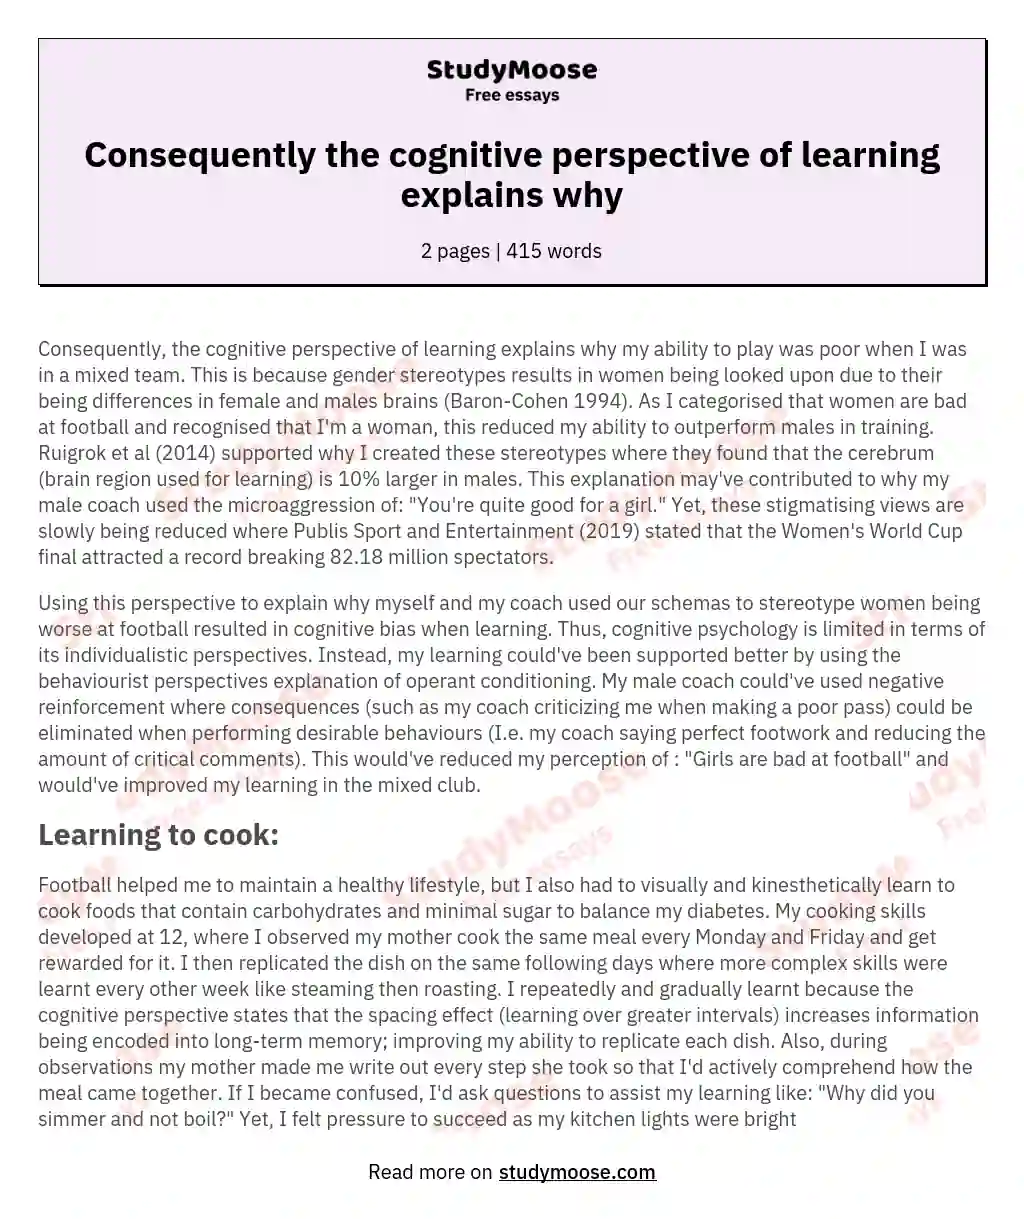 Consequently the cognitive perspective of learning explains why